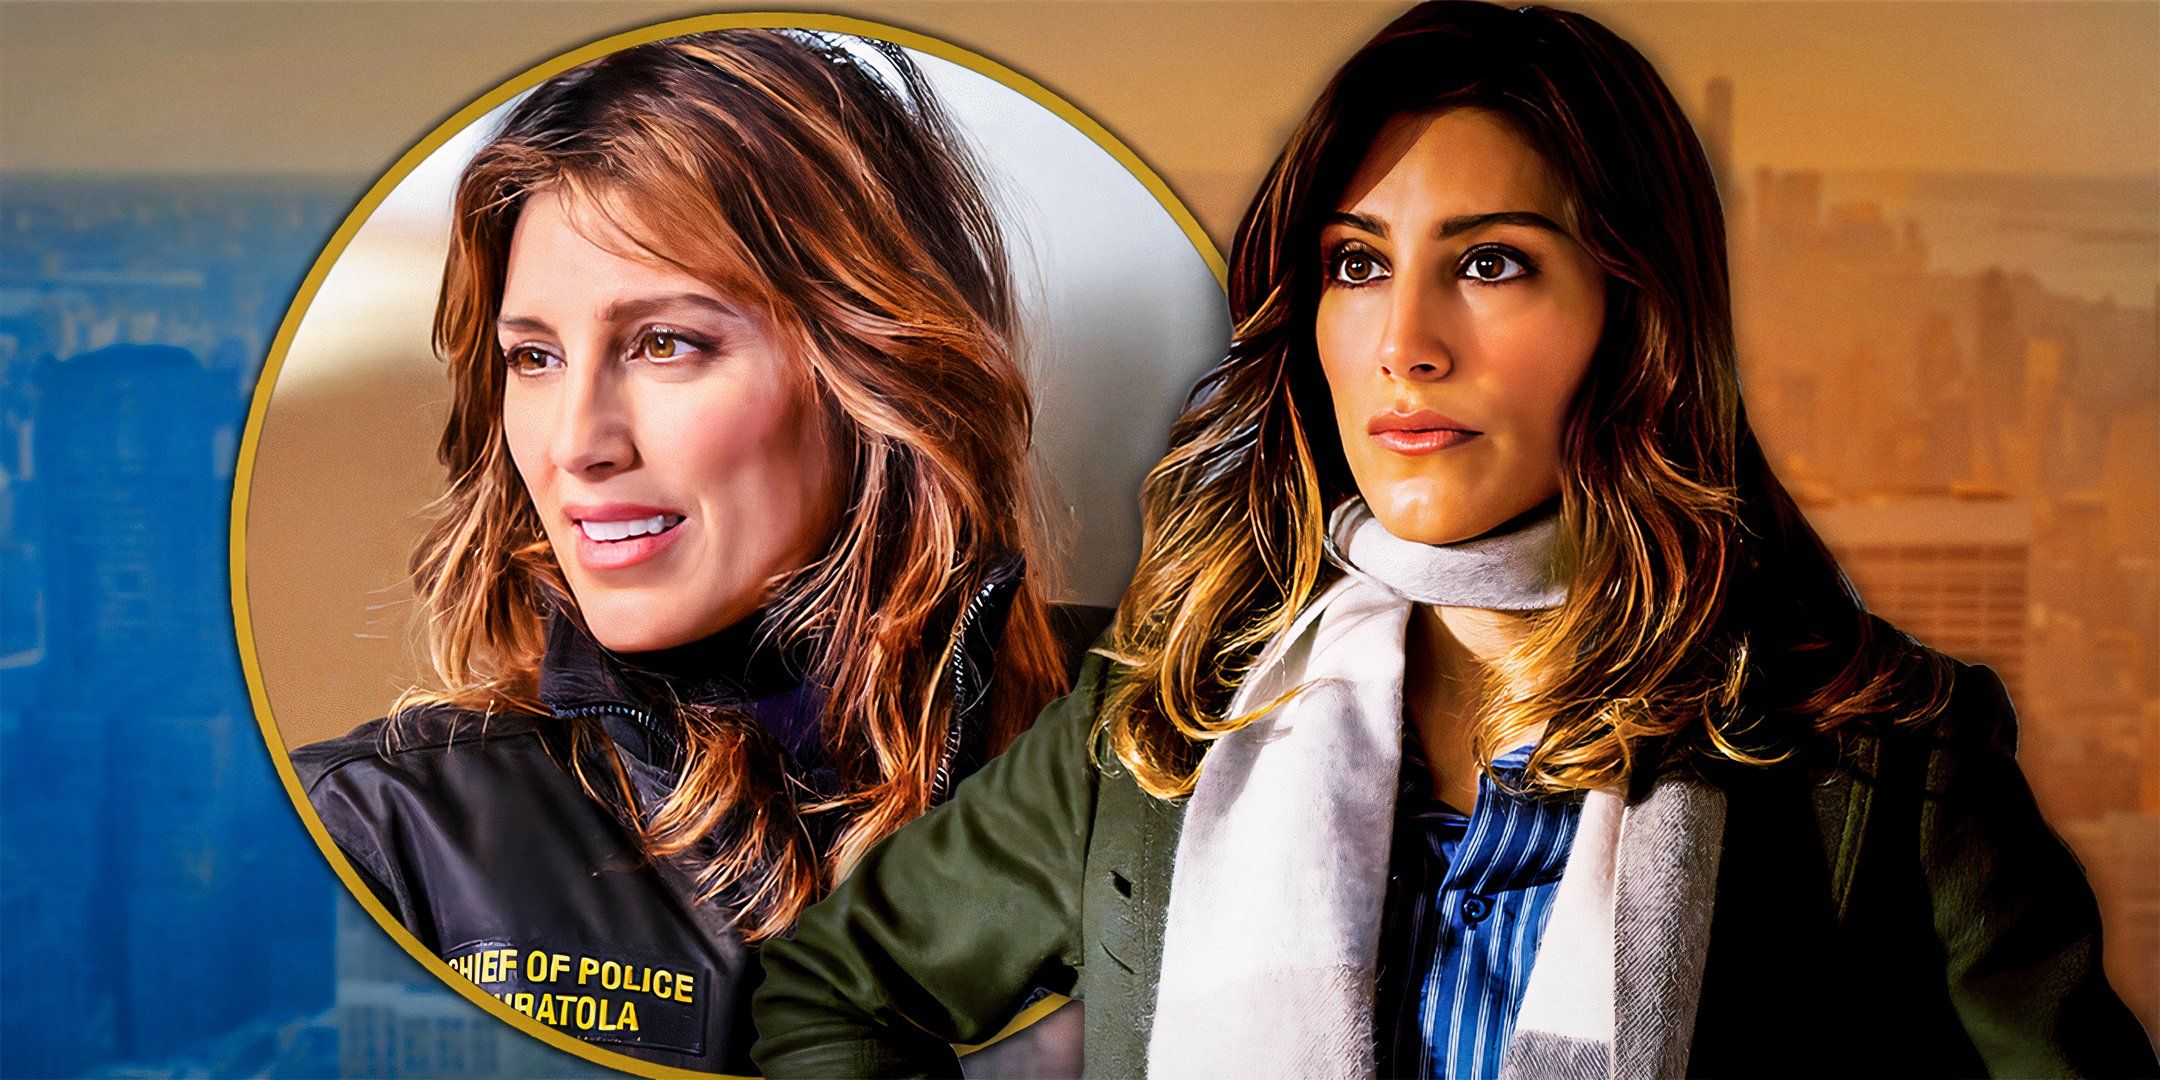 Jennifer Esposito as Jackie Curatola from Blue Bloods